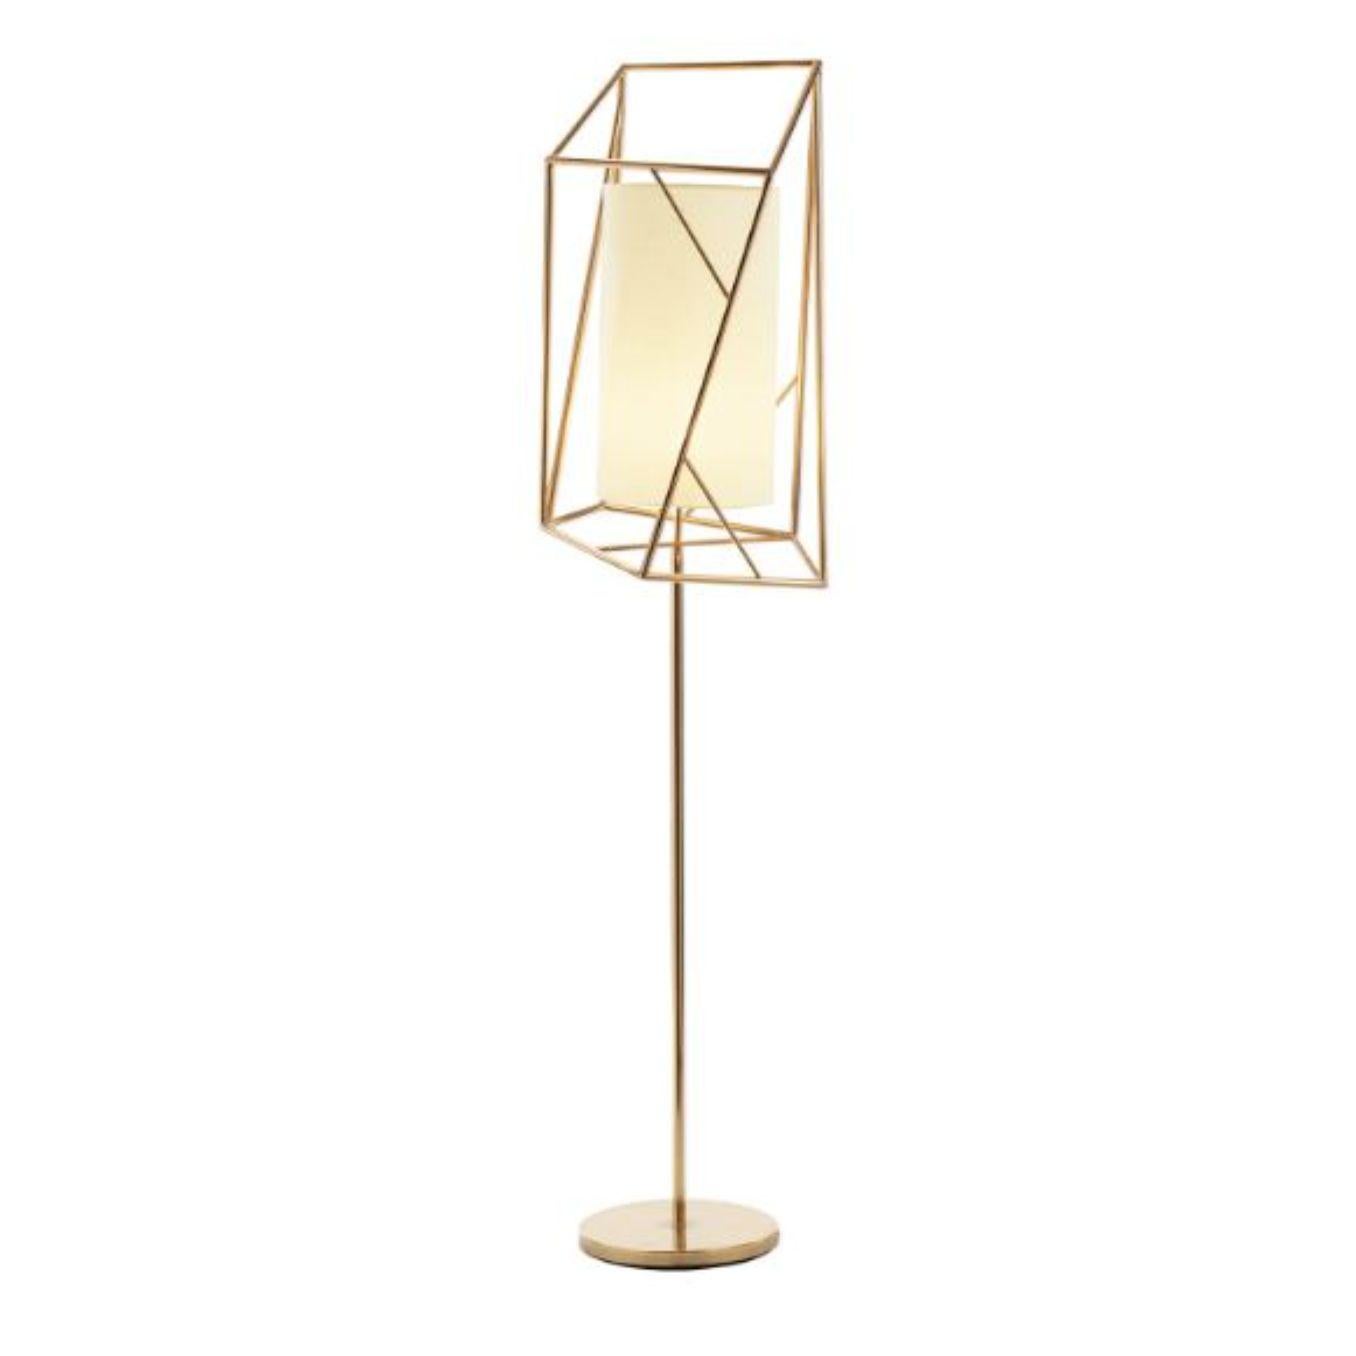 Portuguese Black Star Floor Lamp by Dooq For Sale